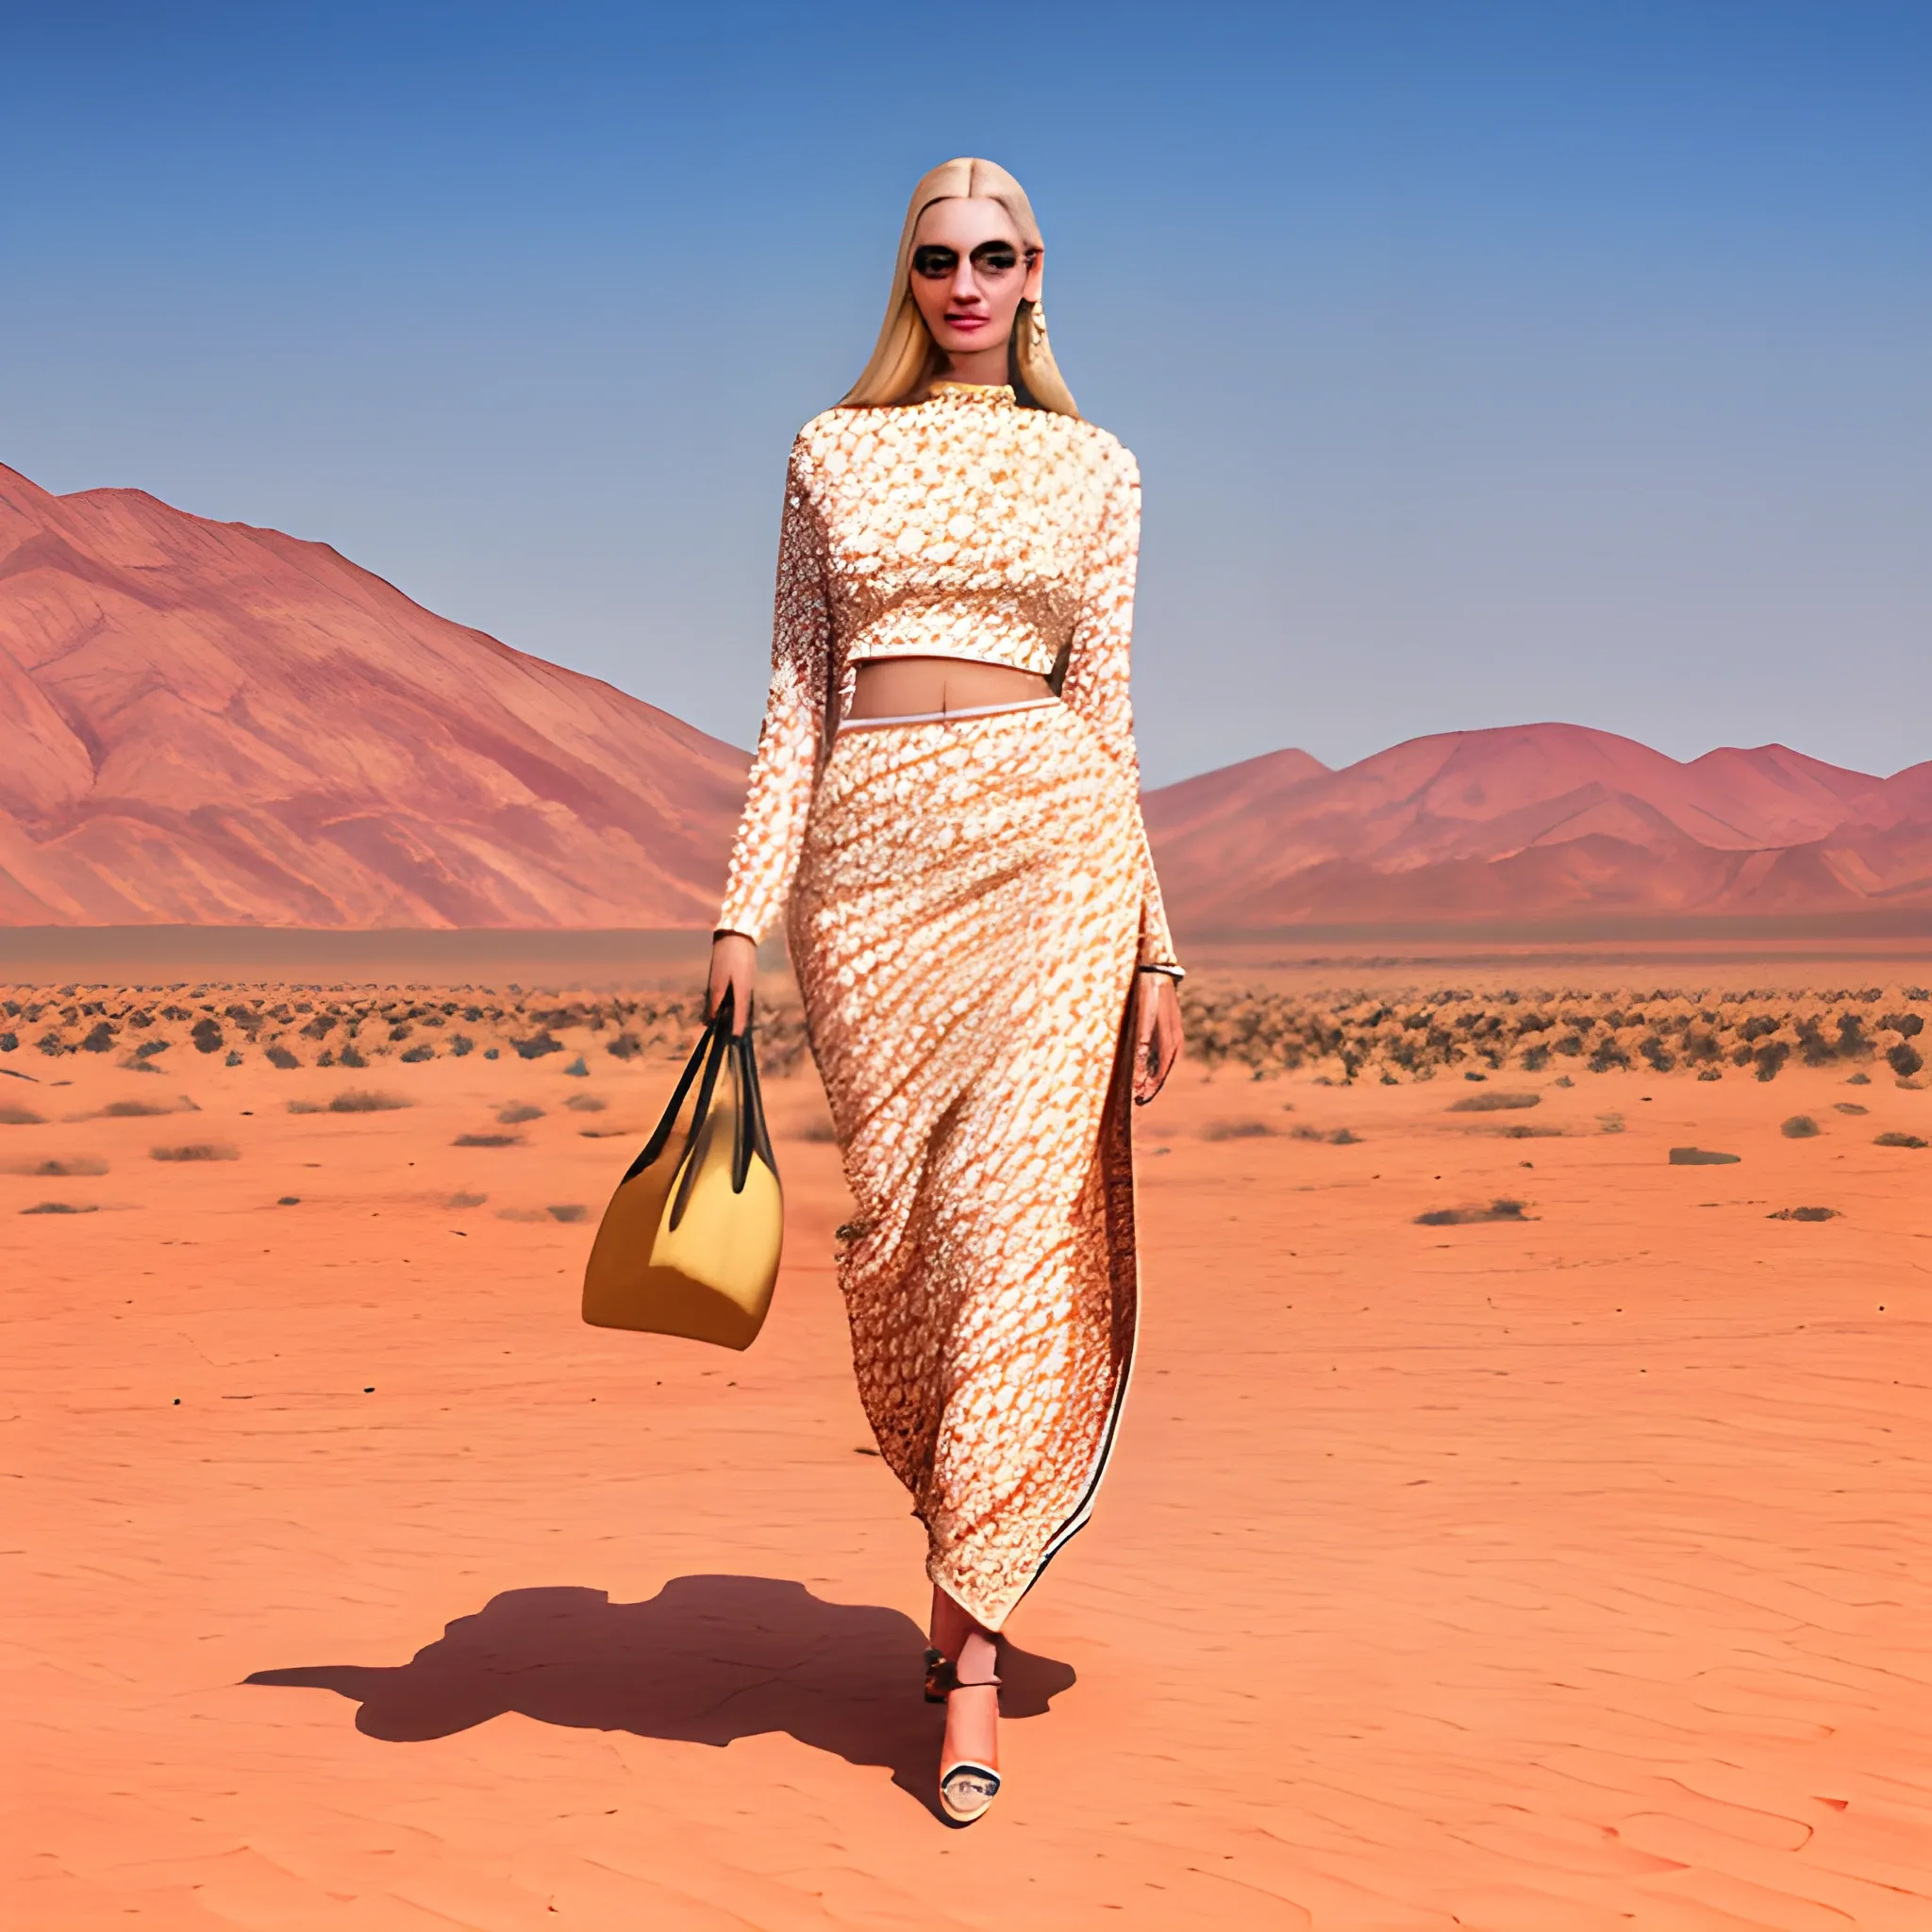 beautiful girl fair, blonde.  wearing Masaba Gupta garment, with minimal accessory in the middle of the desert

realistic, photograph 